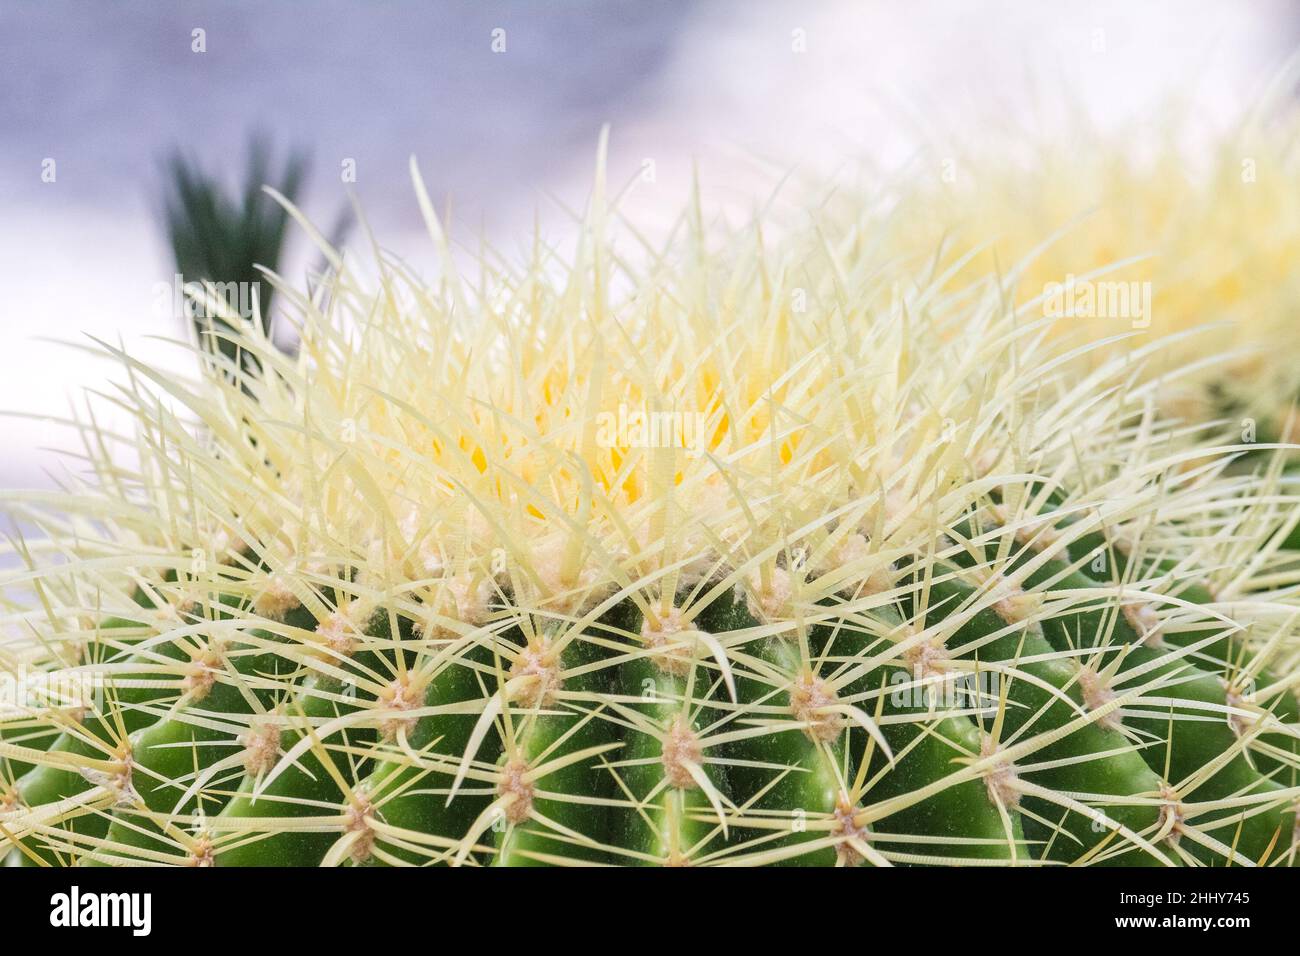 Flowery prickly cactus in close-up view. Stock Photo